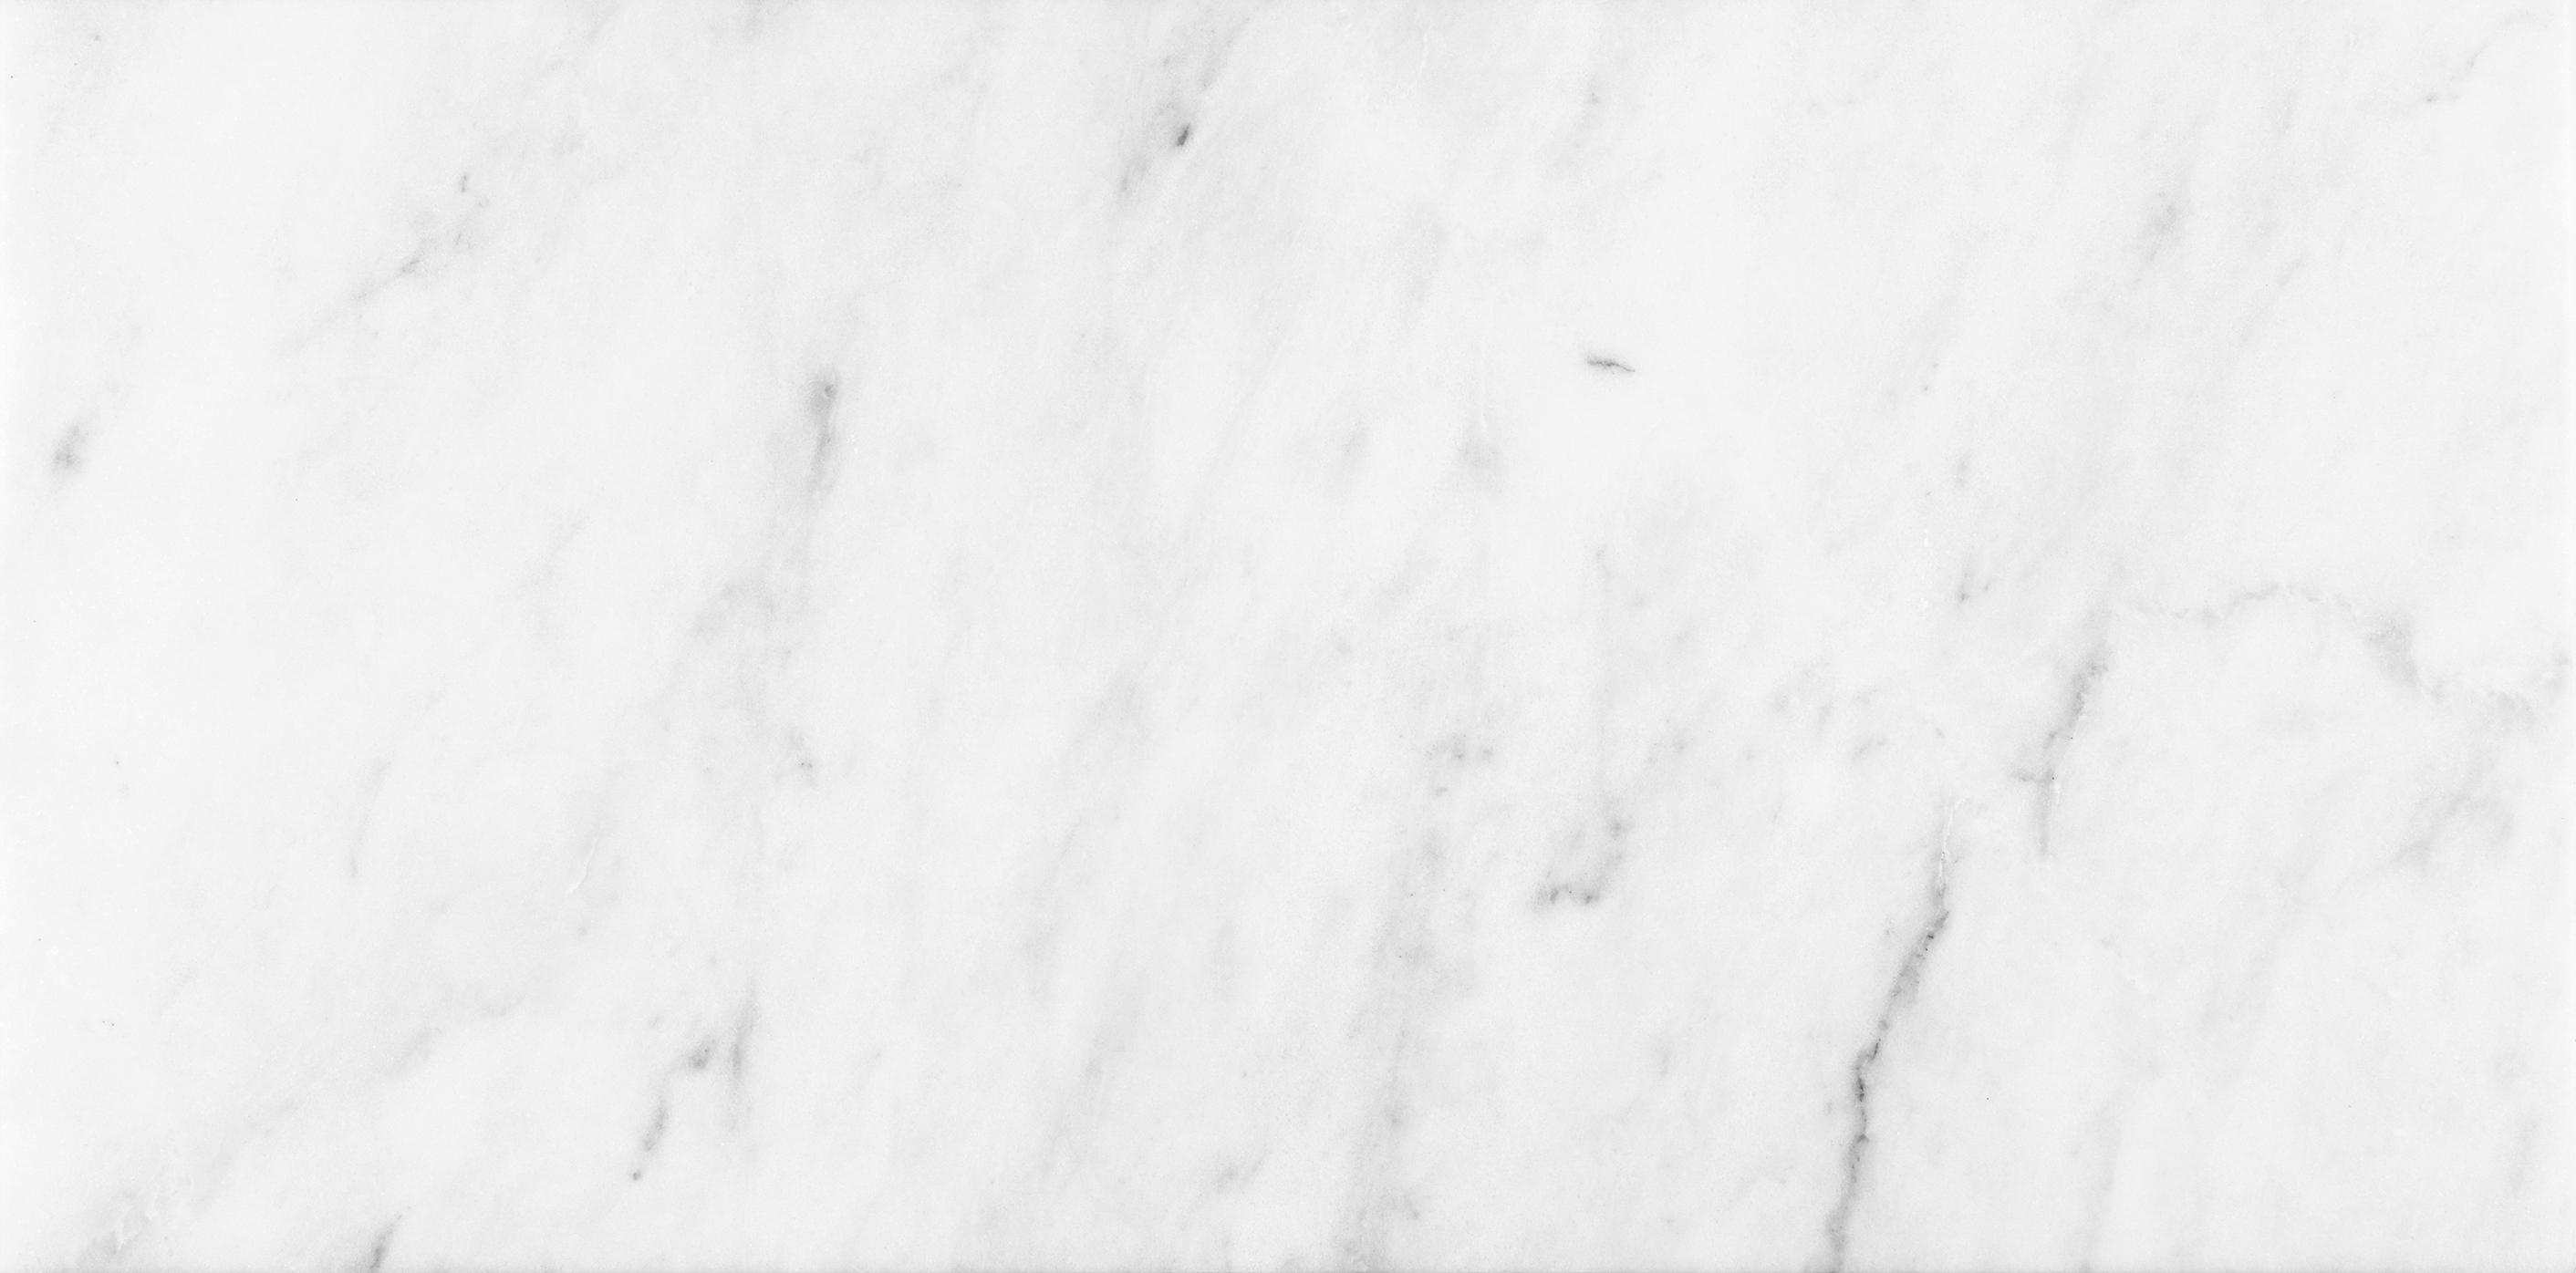 marble pattern natural stone field tile from bianco venatino anatolia collection distributed by surface group international honed finish micro beveled edge 12x24 rectangle shape